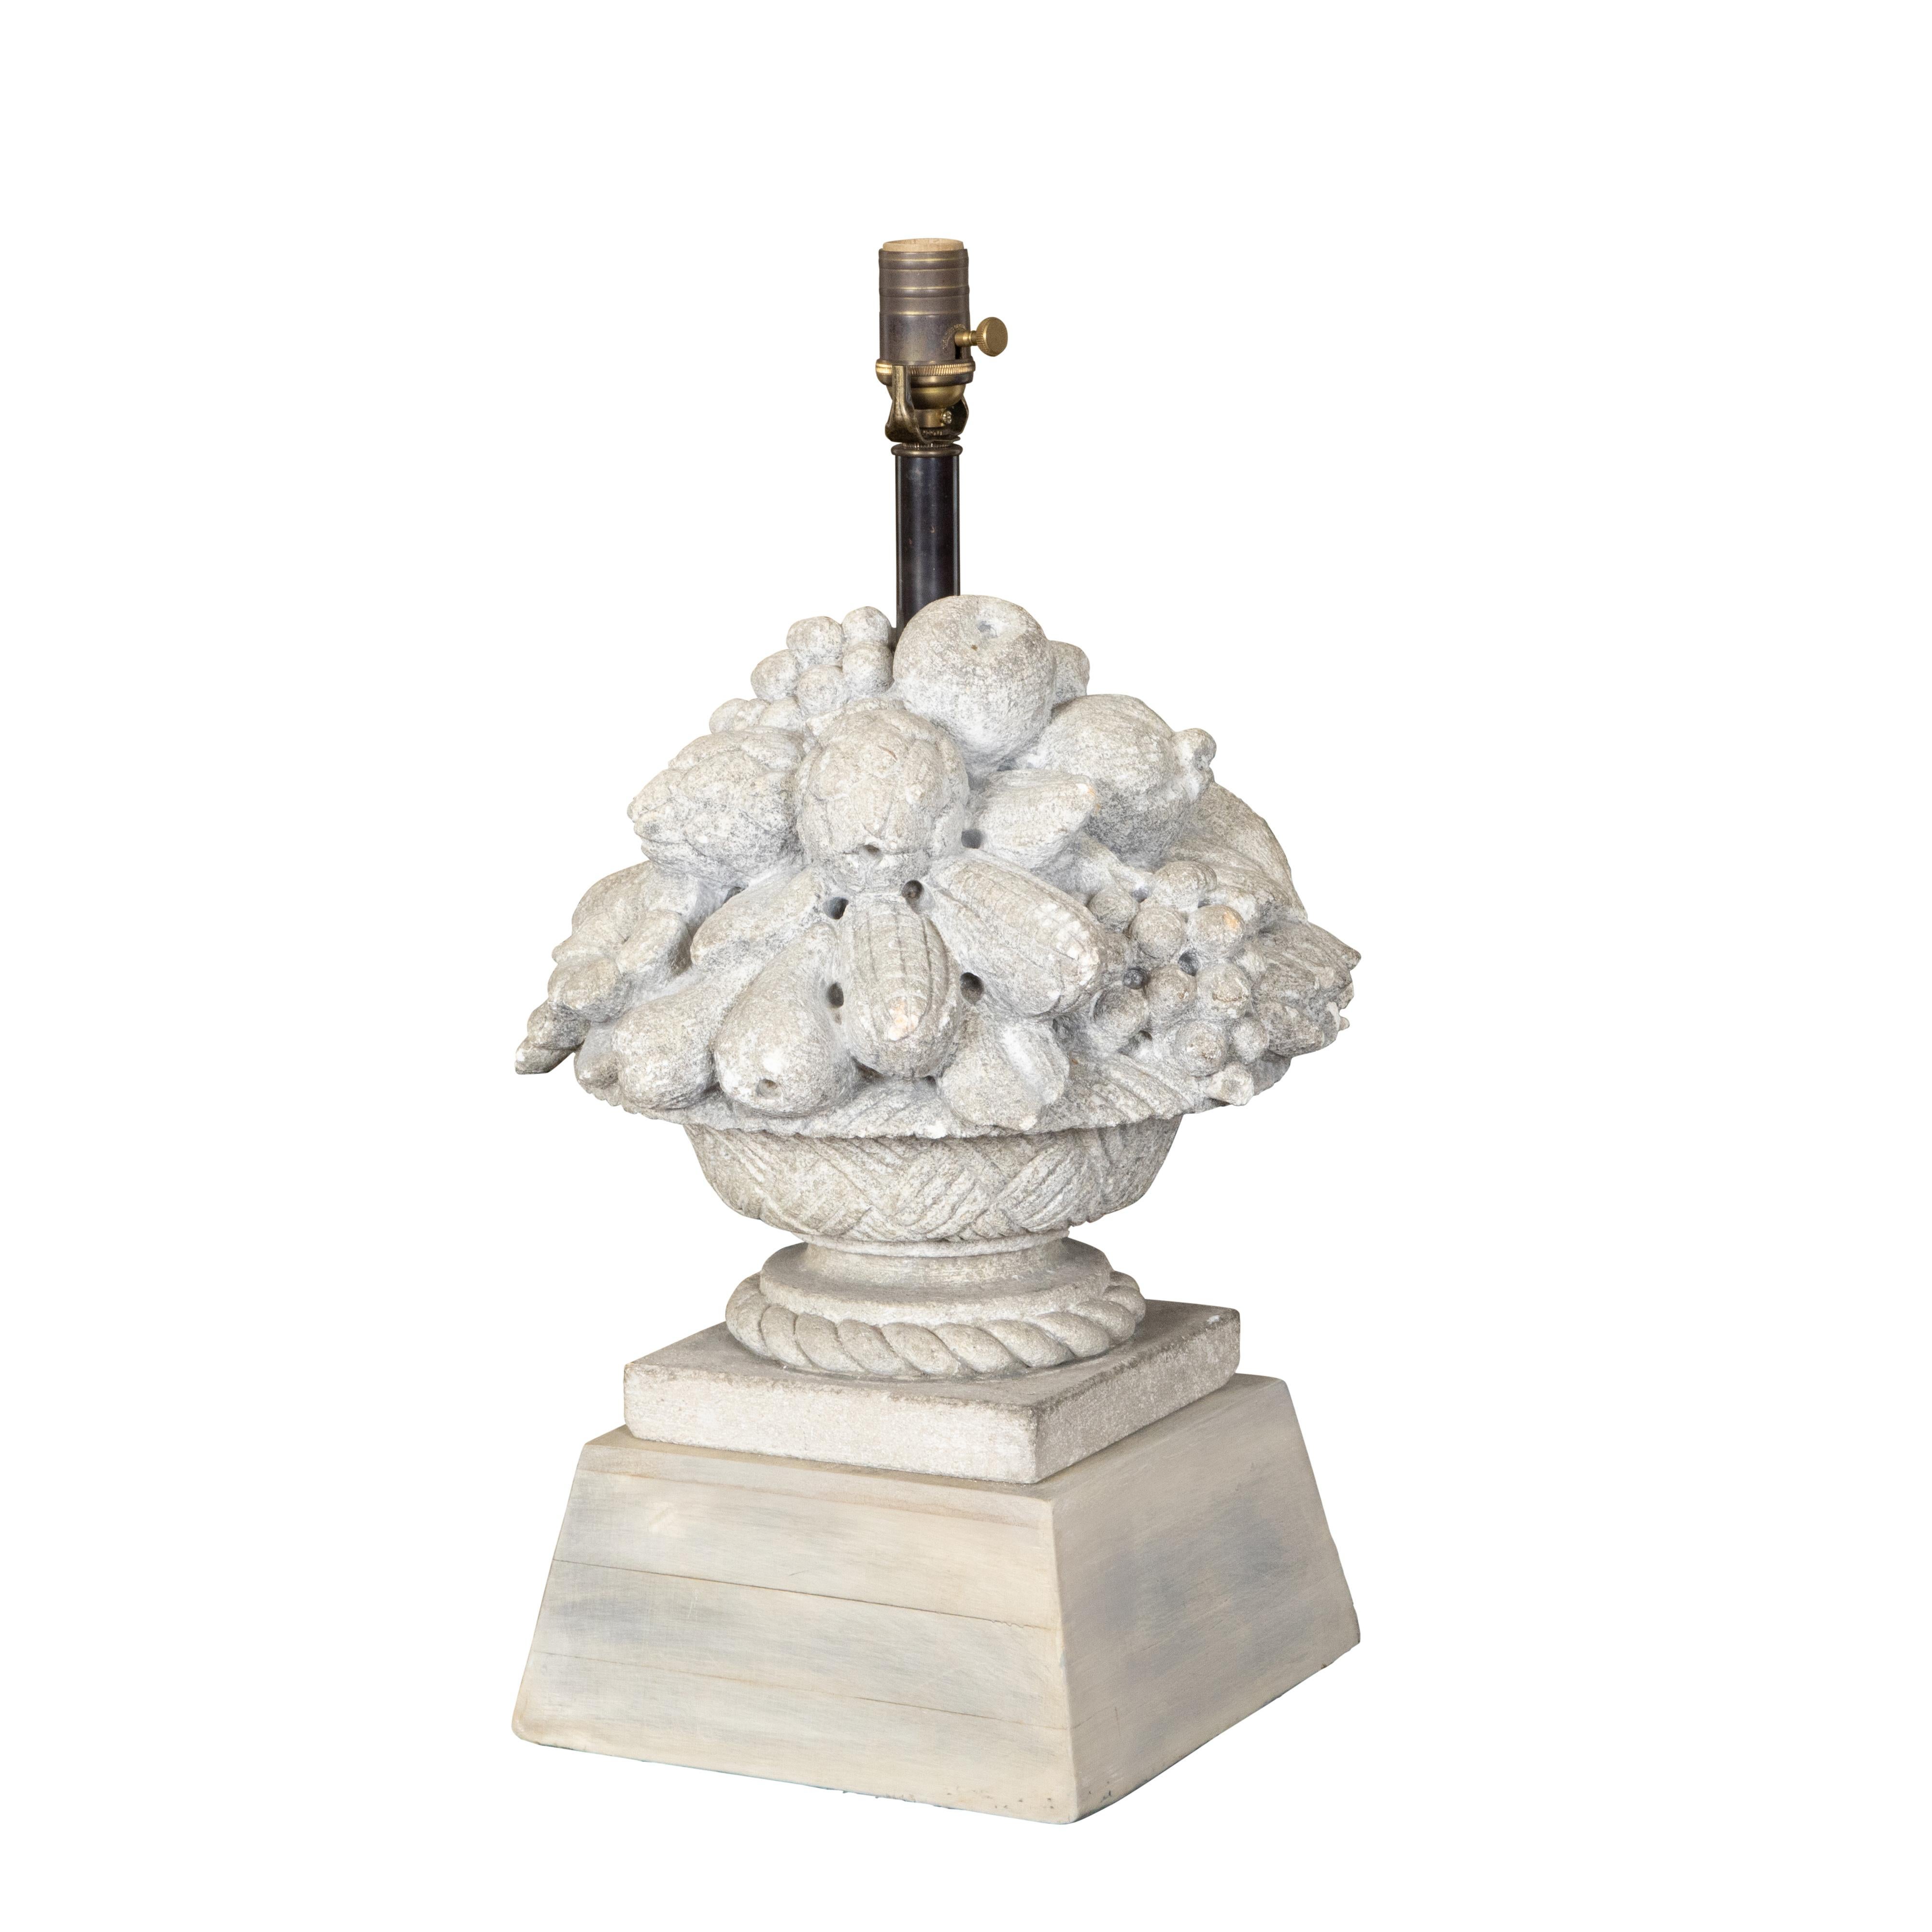 A French carved stone table lamp from the Mid-20th Century, depicting a fruit bowl on a tall pedestal, wired for the USA. Created in France during the second quarter of the 20th century, this table lamp features a carved stone body depicting a